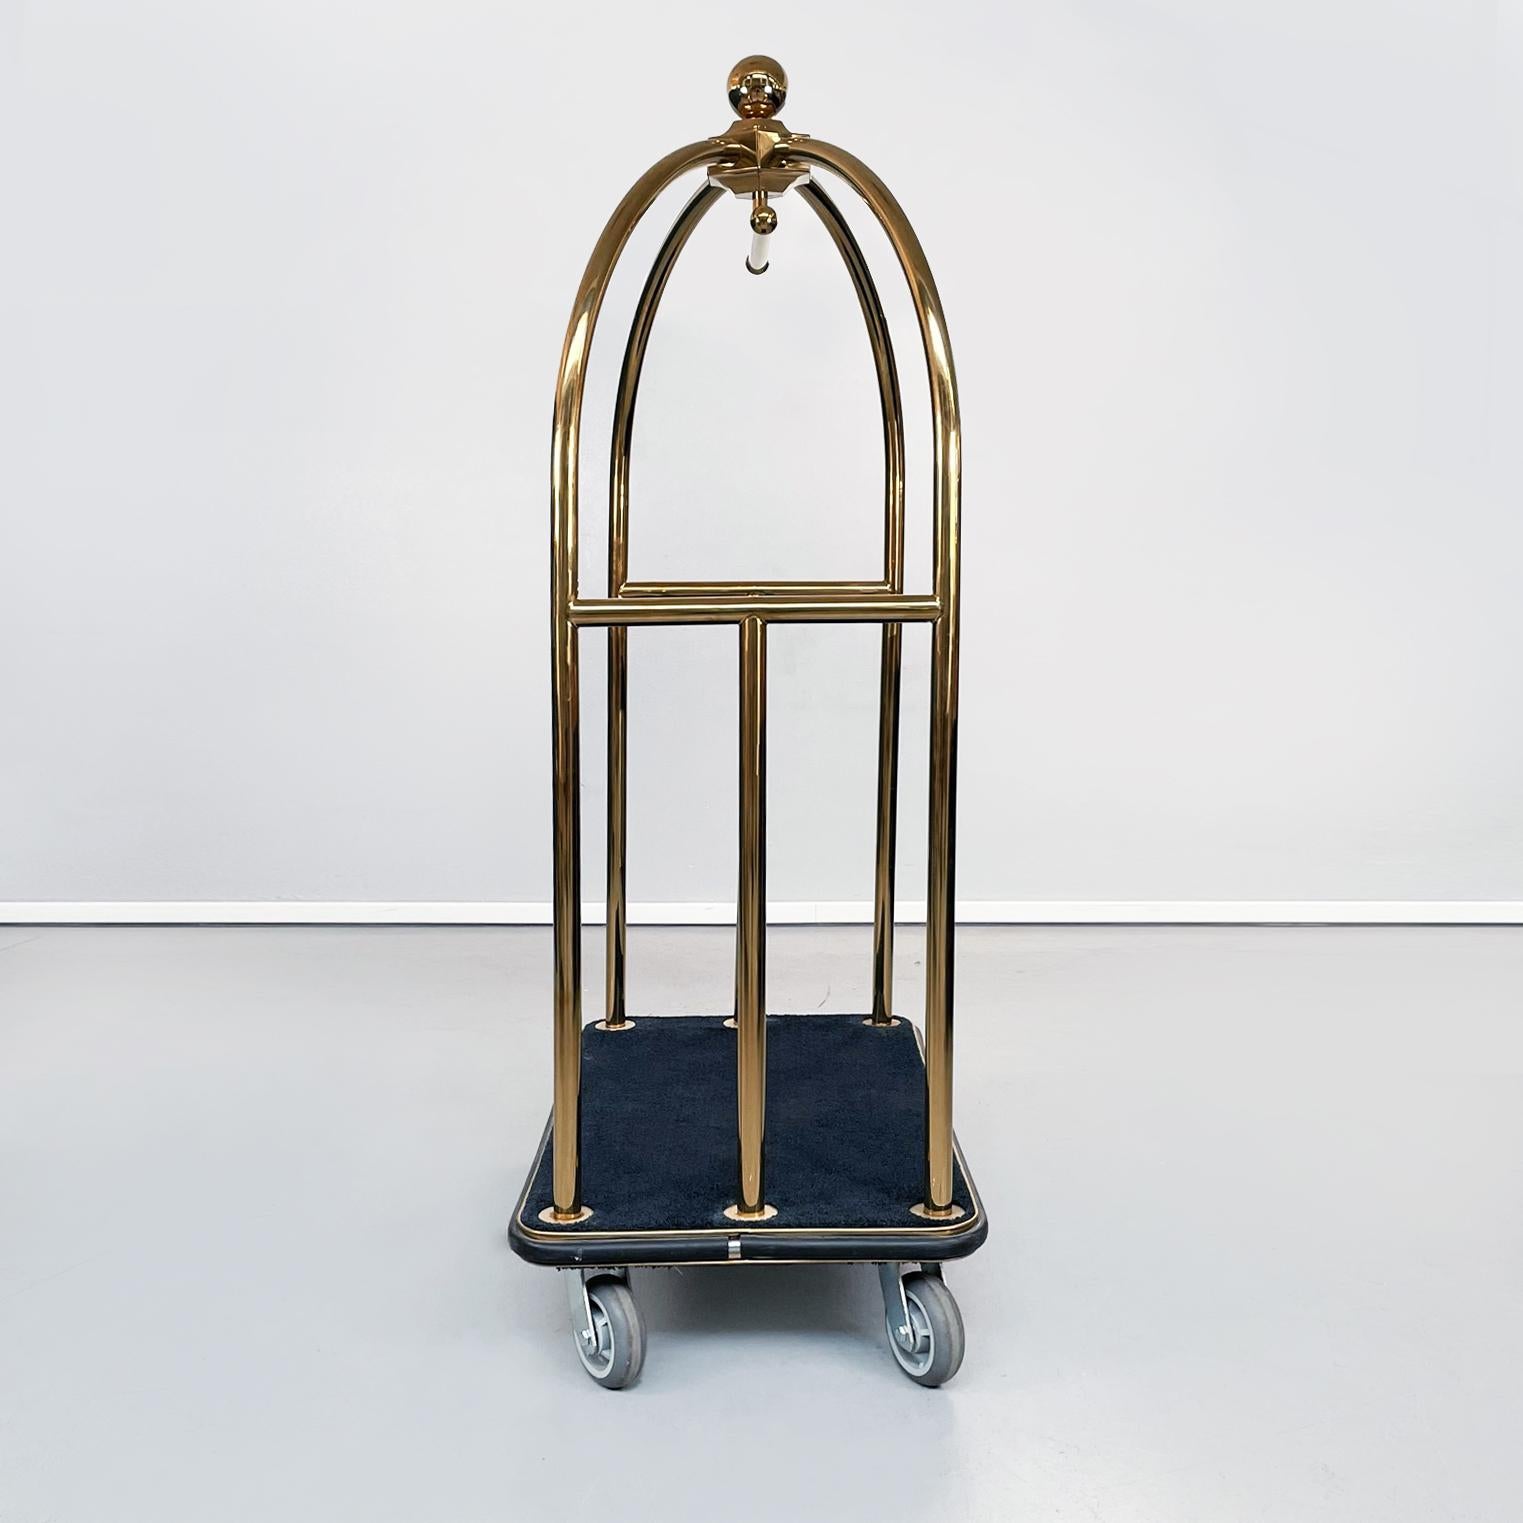 Italian modern Classic Luggage cart in golden metal and black fabric, 1990s
Luggage cart, typical for hotels, with rectangular top in black fabric. The central structure is in curved tubular metal, finished in gold. In the center it has a horizontal